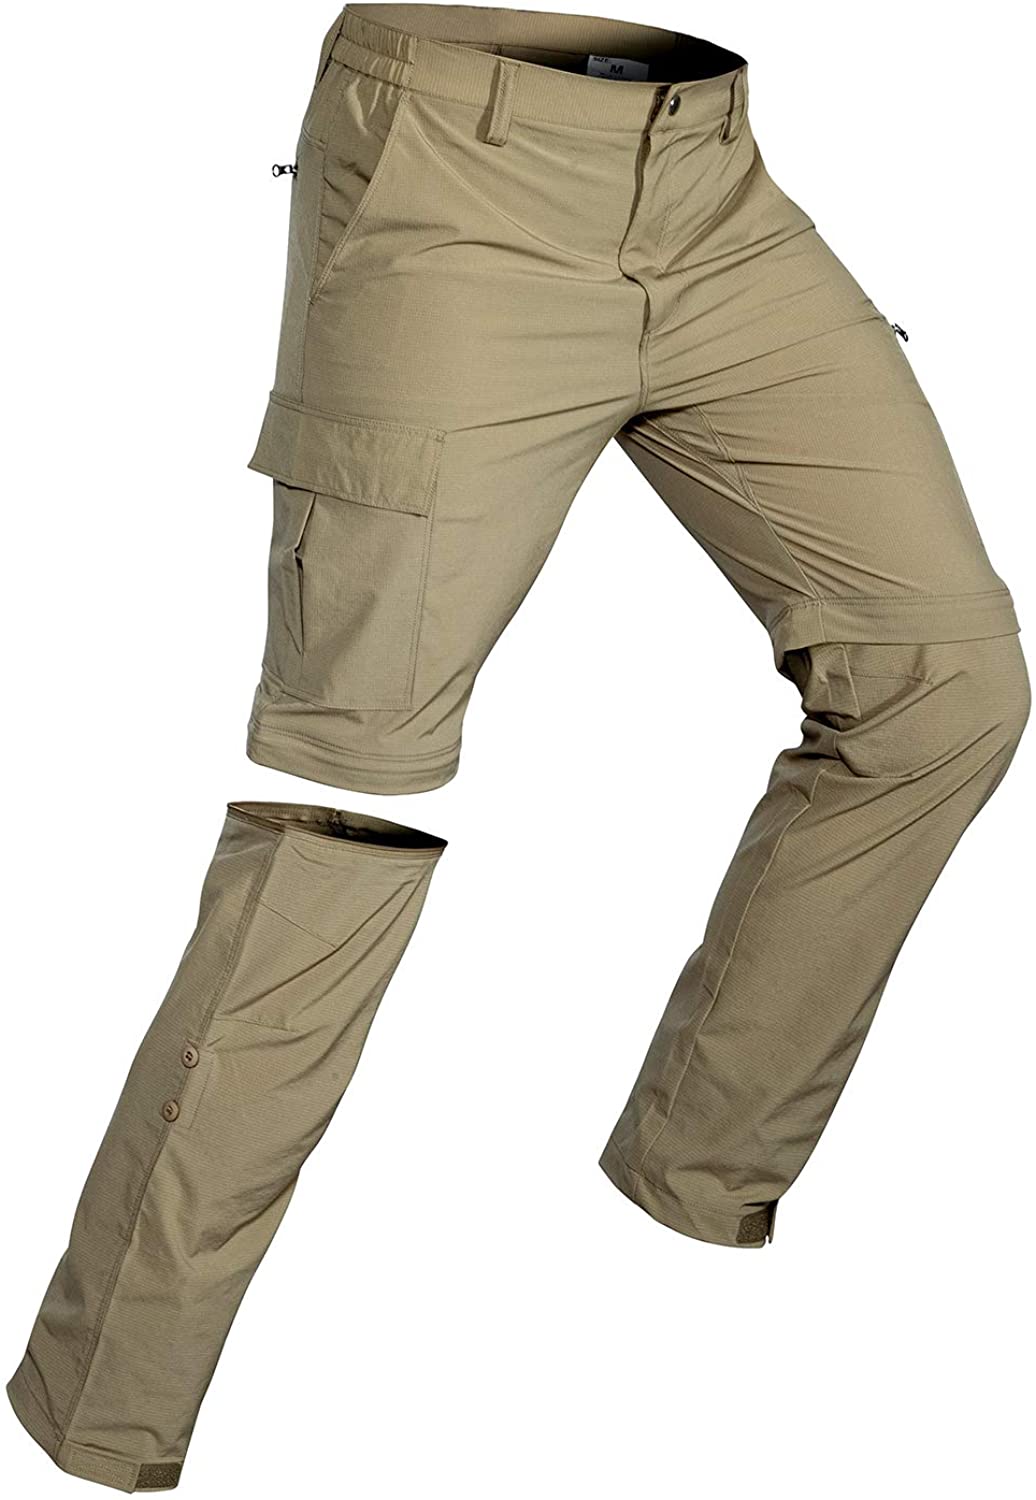  Wespornow Men's-Hiking-Cargo-Pants Lightweight Quick Dry  Waterproof Tactical Pants for Work Travel Camping Hunting Fishing (Black,  30) : Clothing, Shoes & Jewelry